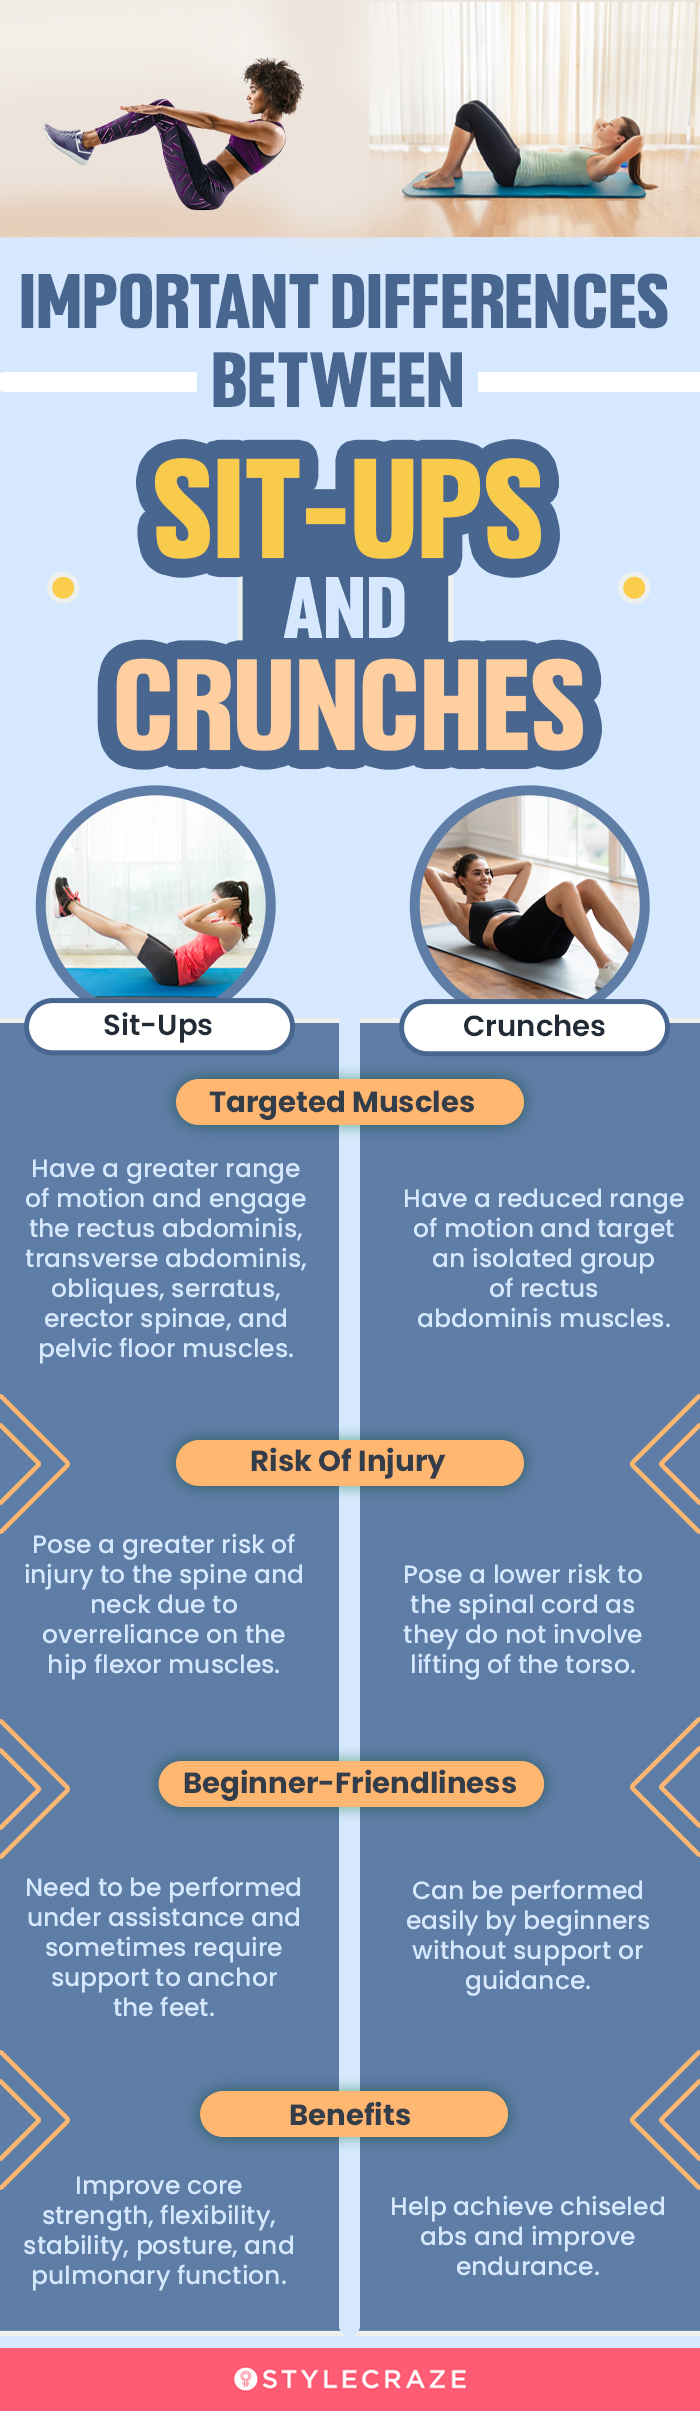 important differences between sit ups and crunches (infographic)